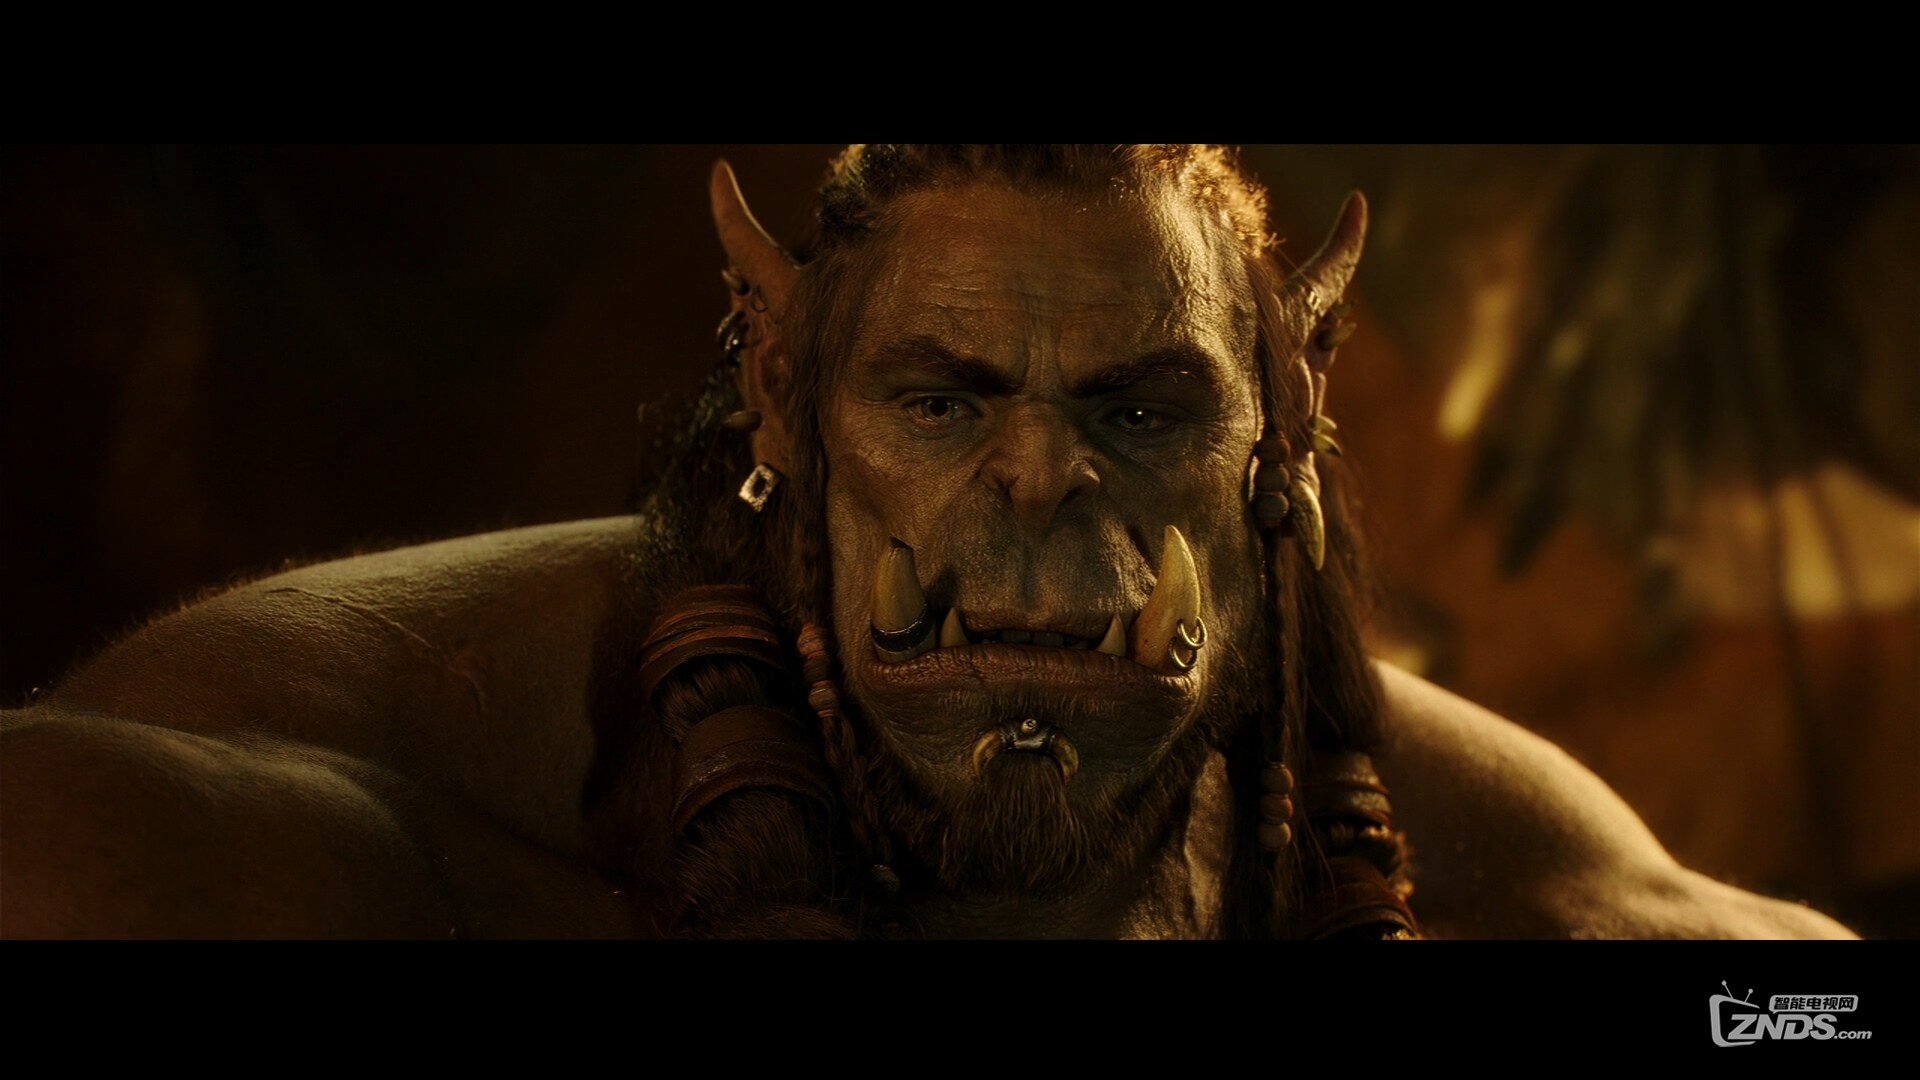 Warcraft_Trailer1_Texted_Stereo_PCM_1080p.mov_20160214_211359.937.jpg